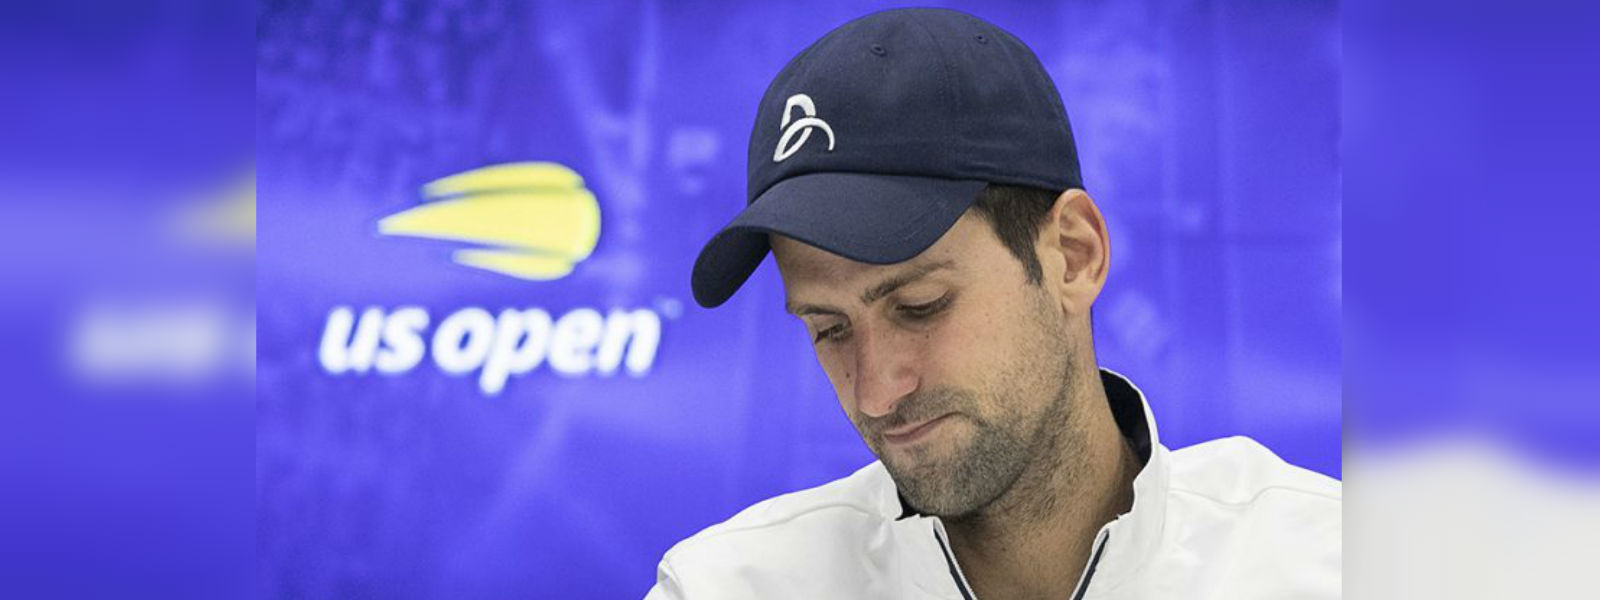 ‘Of course it hurts’, says Djokovic after retiring from U.S. Open with shoulder injury